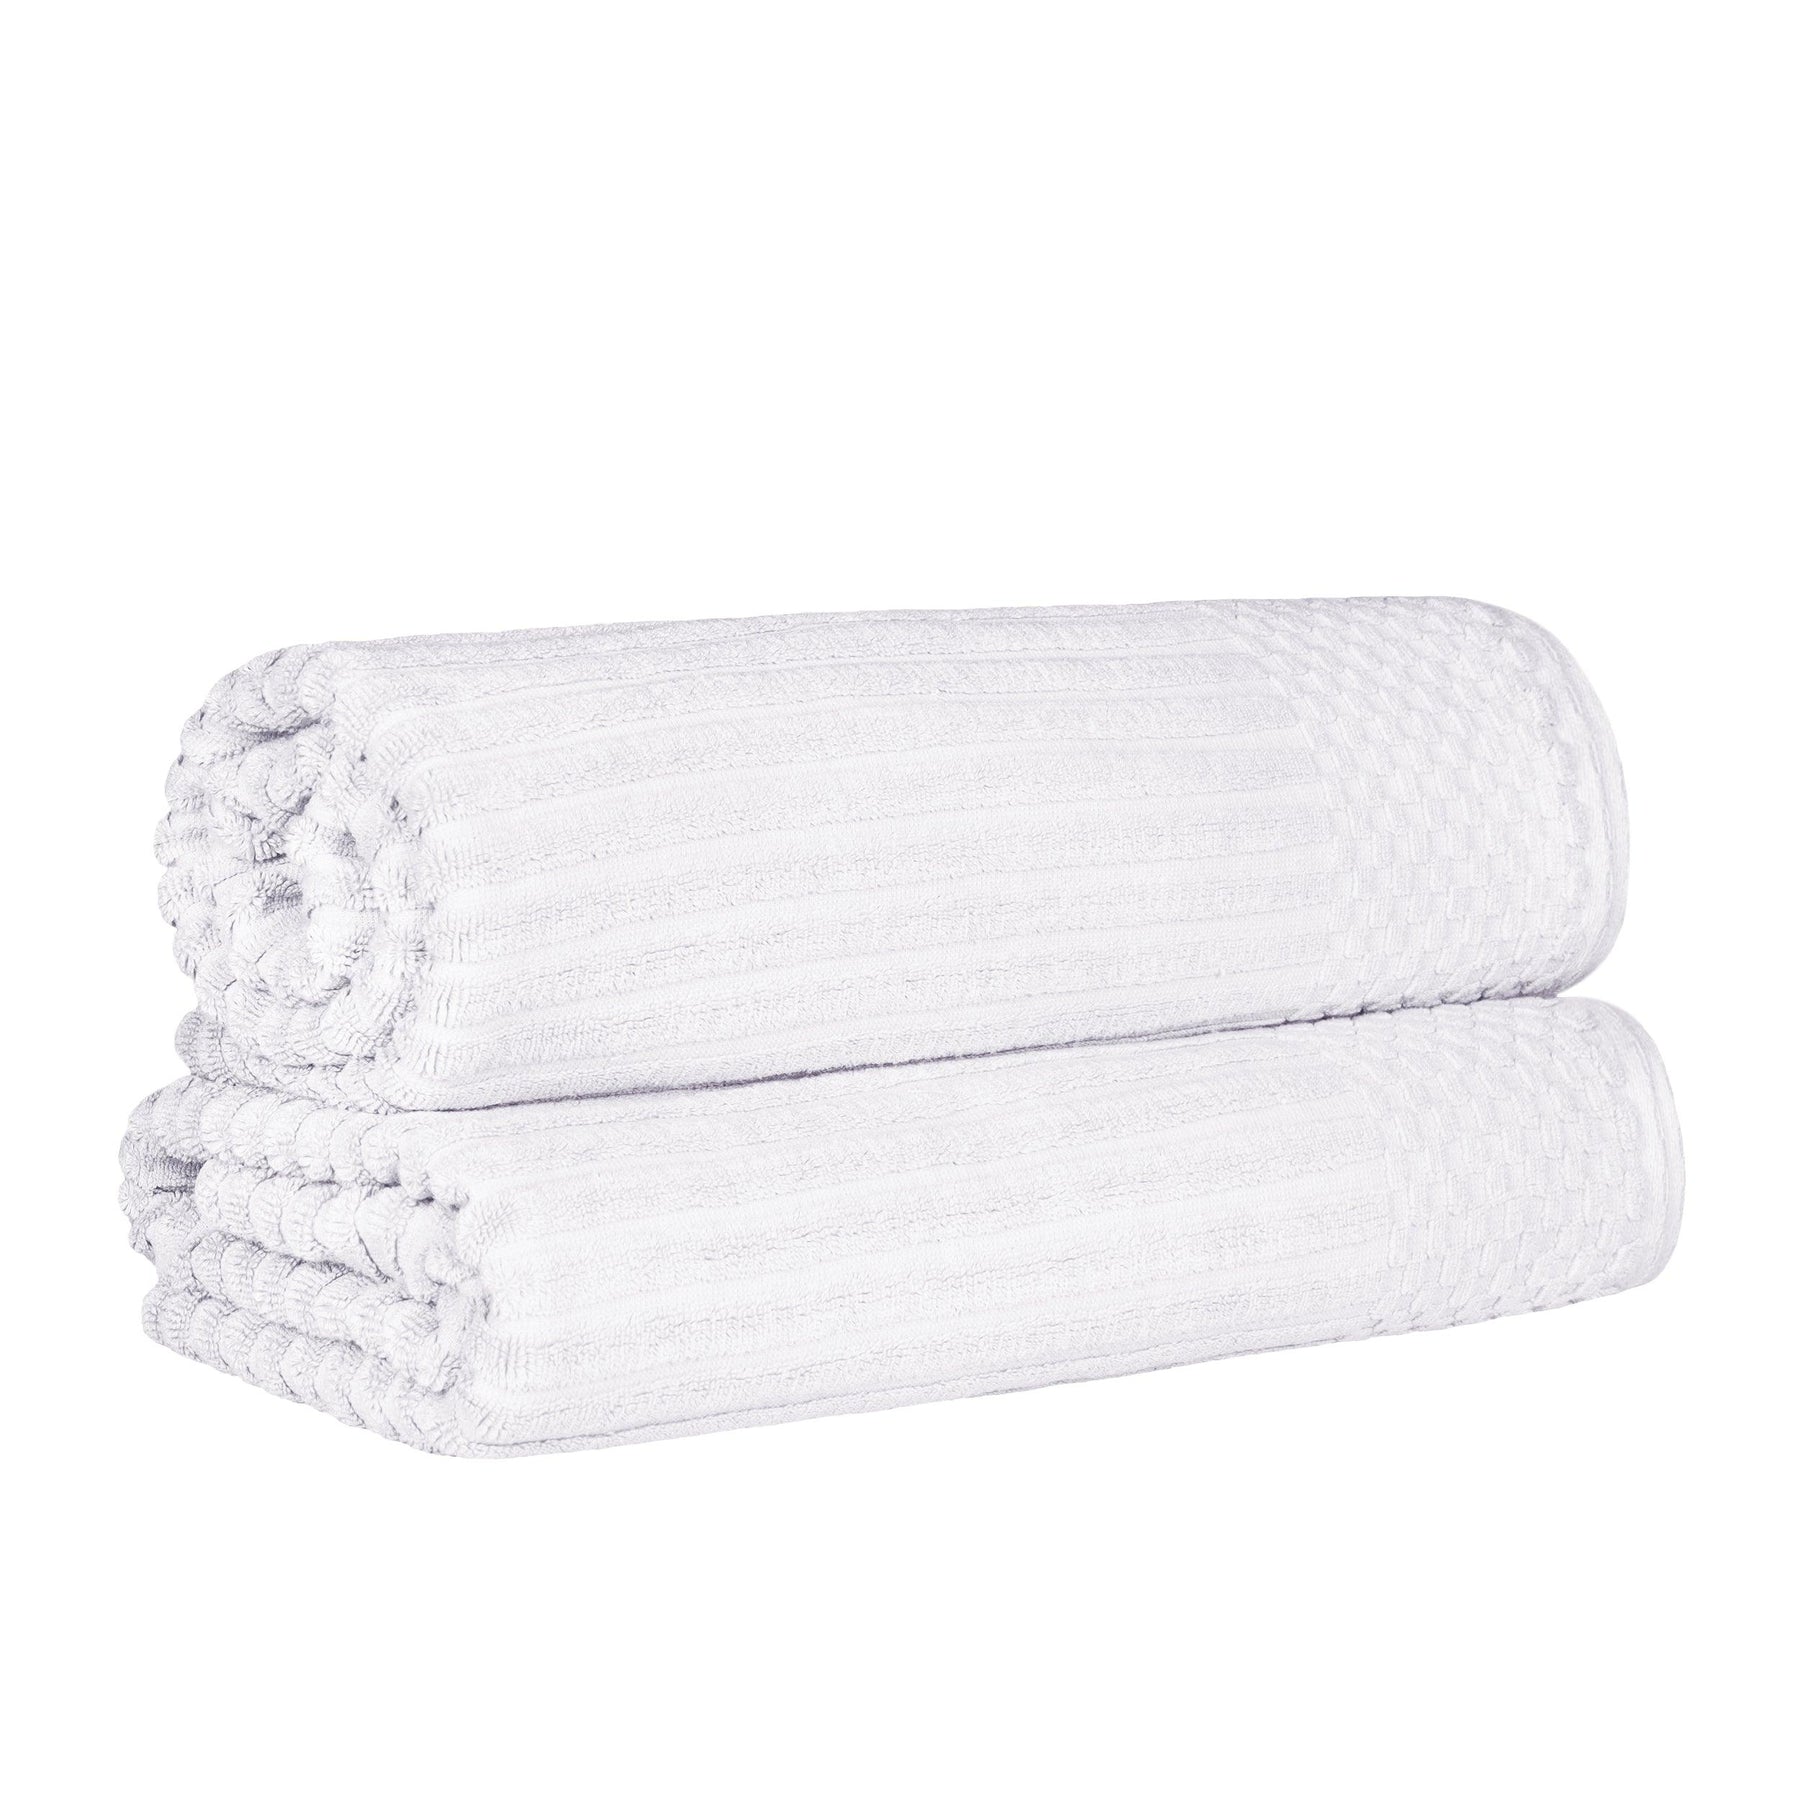 Ribbed Textured Cotton Bath Sheet Ultra-Absorbent Towel Set -  White